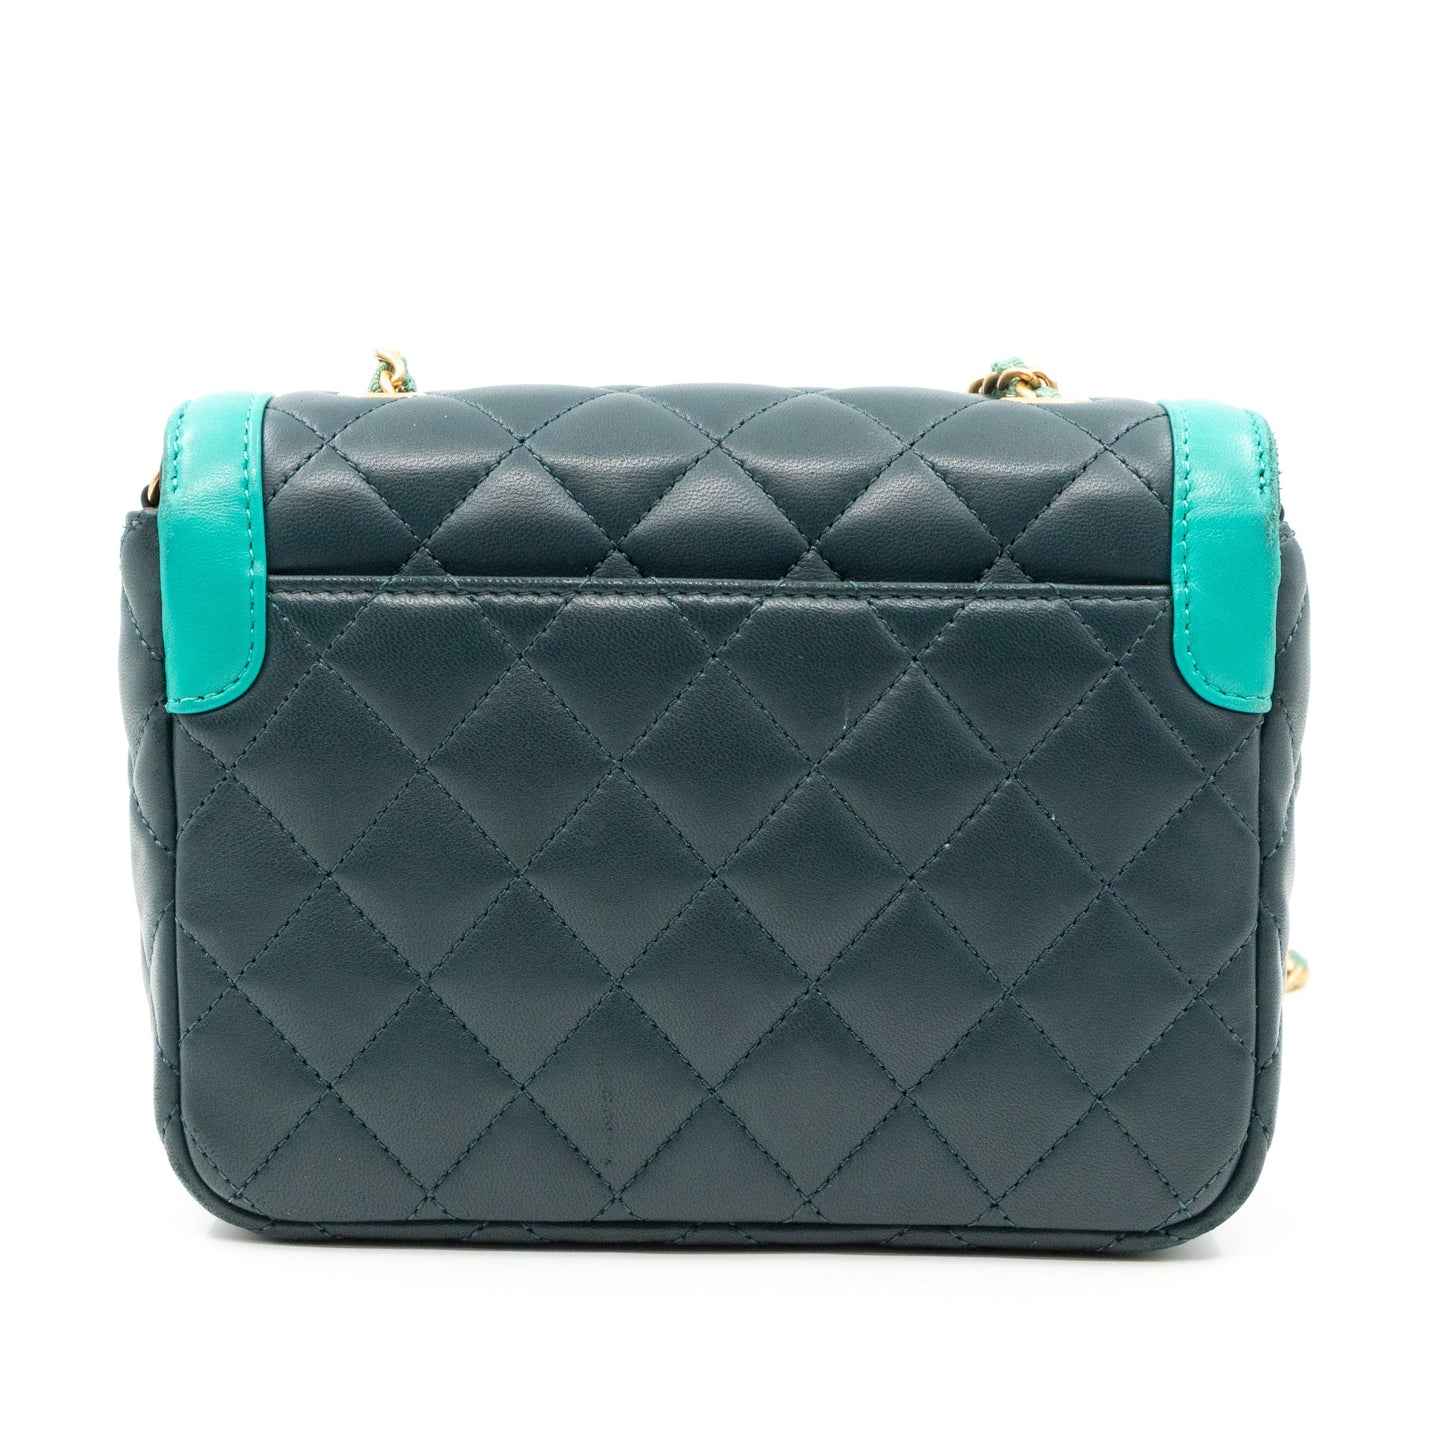 Small Single Flap Bag Blue Leather